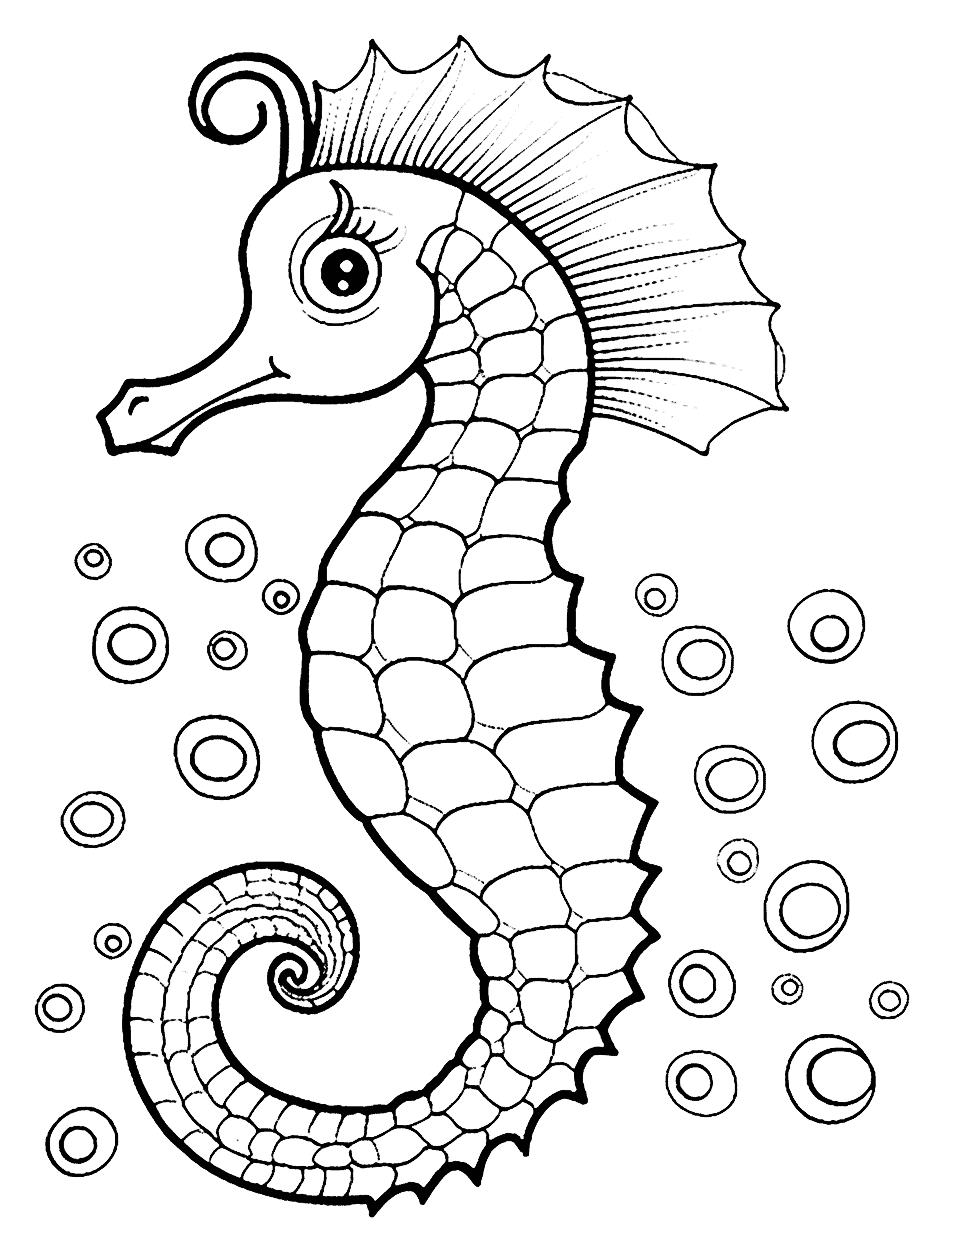 Gentle Seahorse Animal Coloring Page - A delicate seahorse gracefully swimming in the sea.